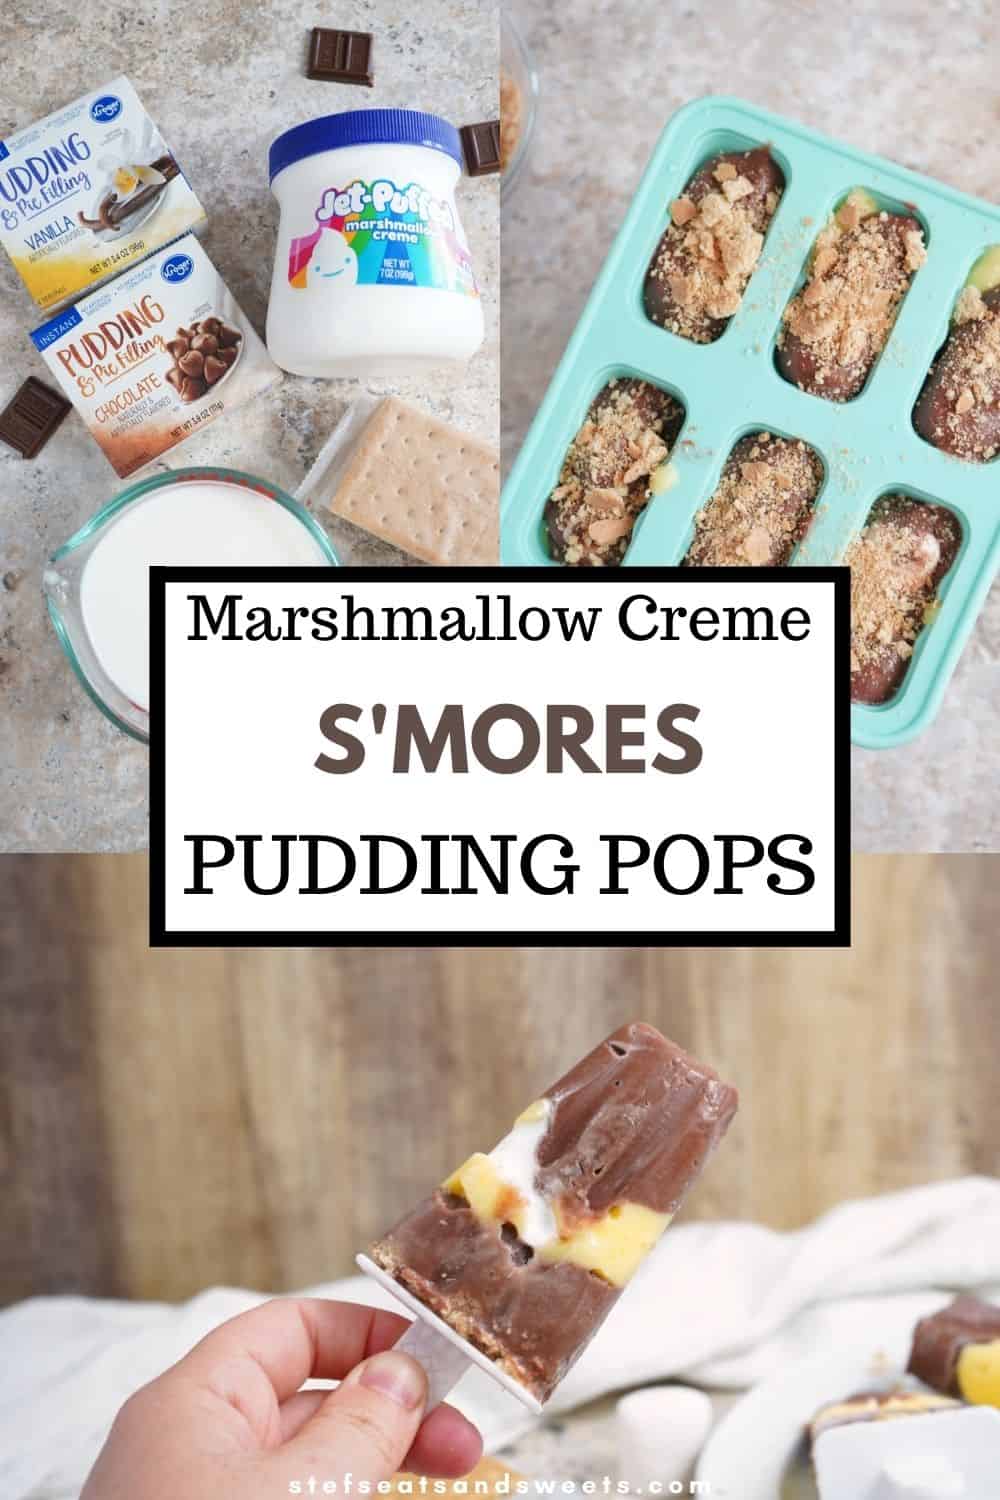 Smores pudding pops with marshmallows creme 